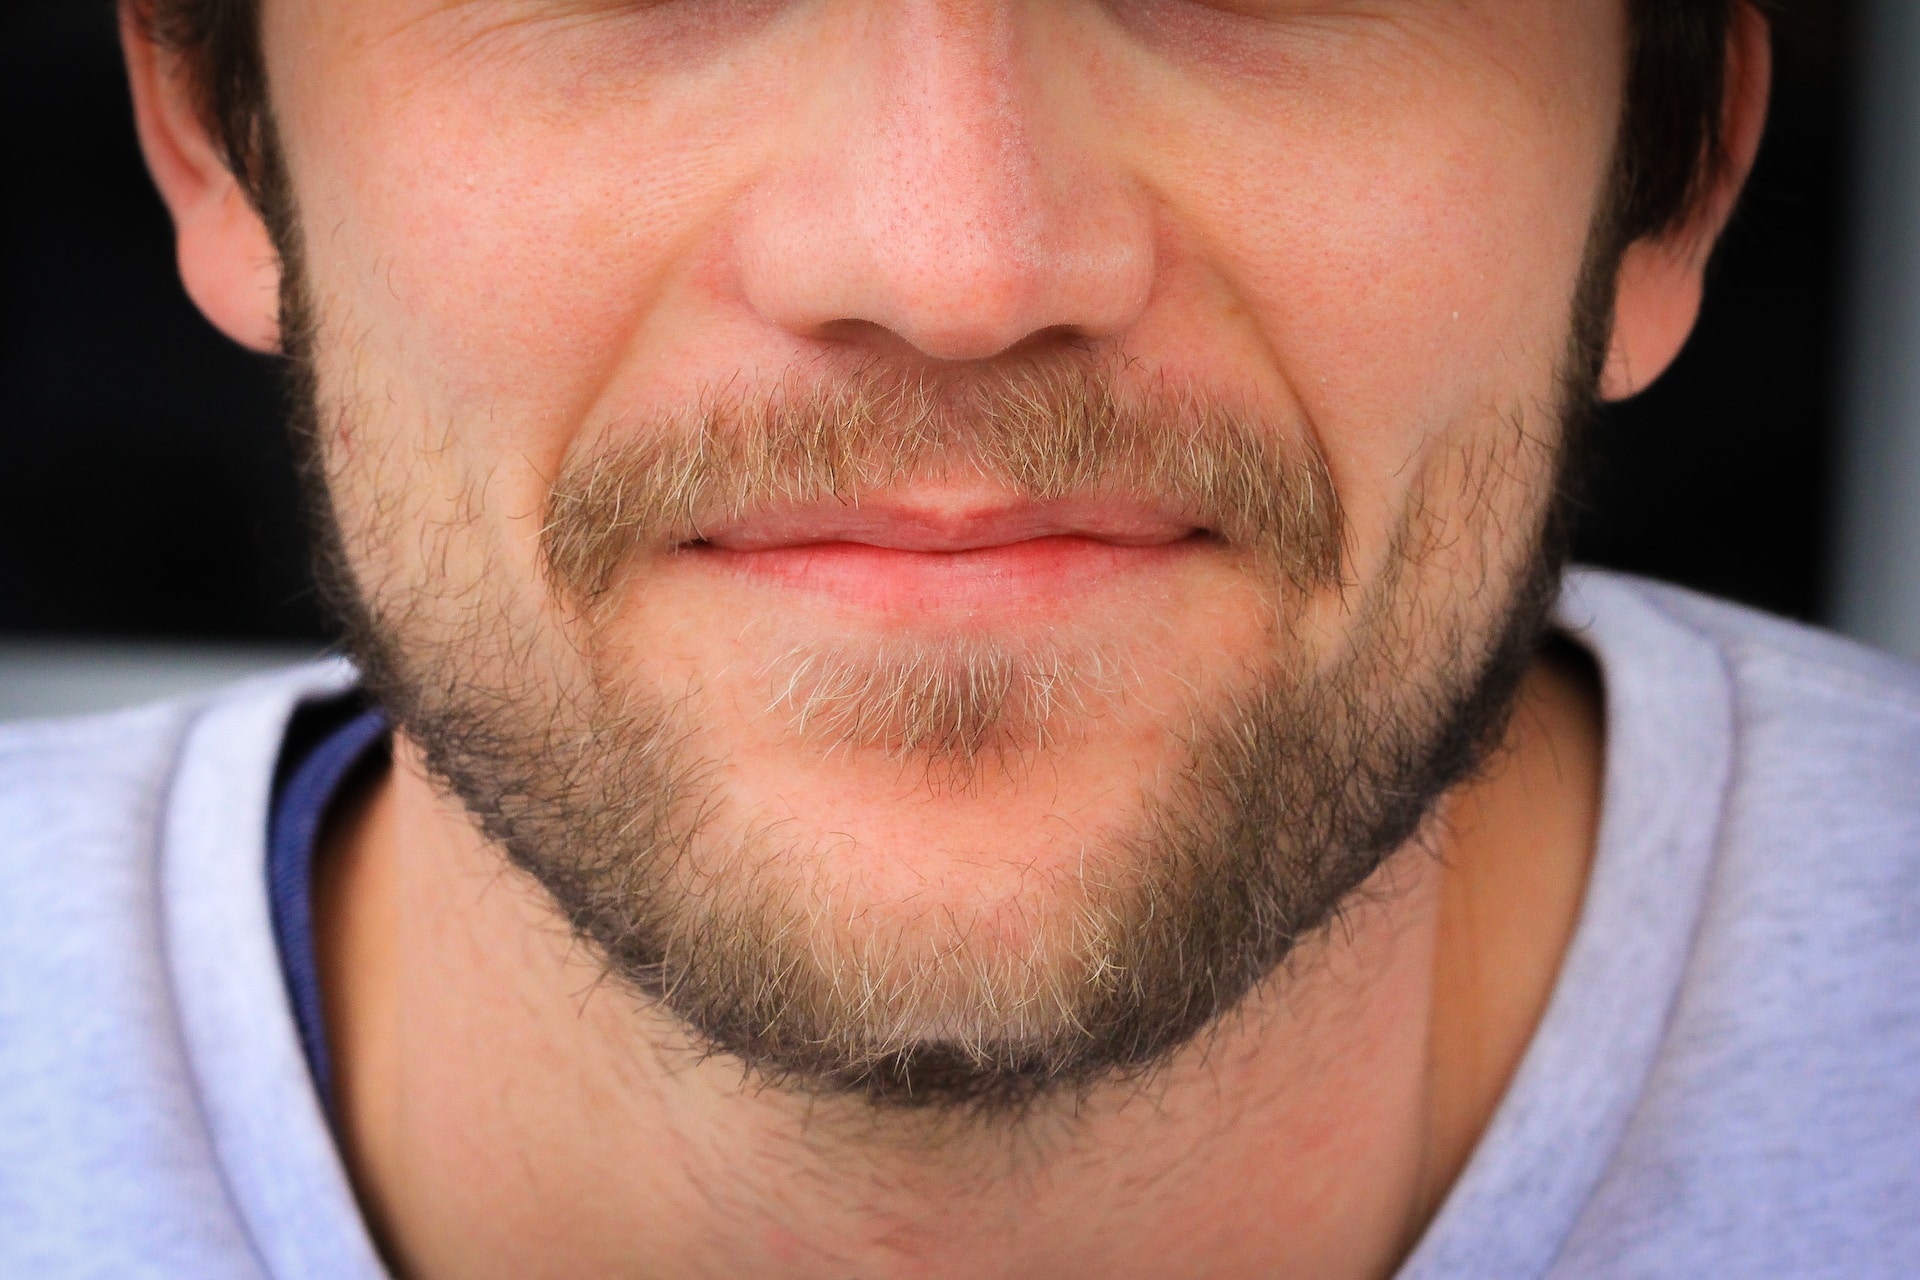 Can Ingrown Facial Hair Really Be Prevented?